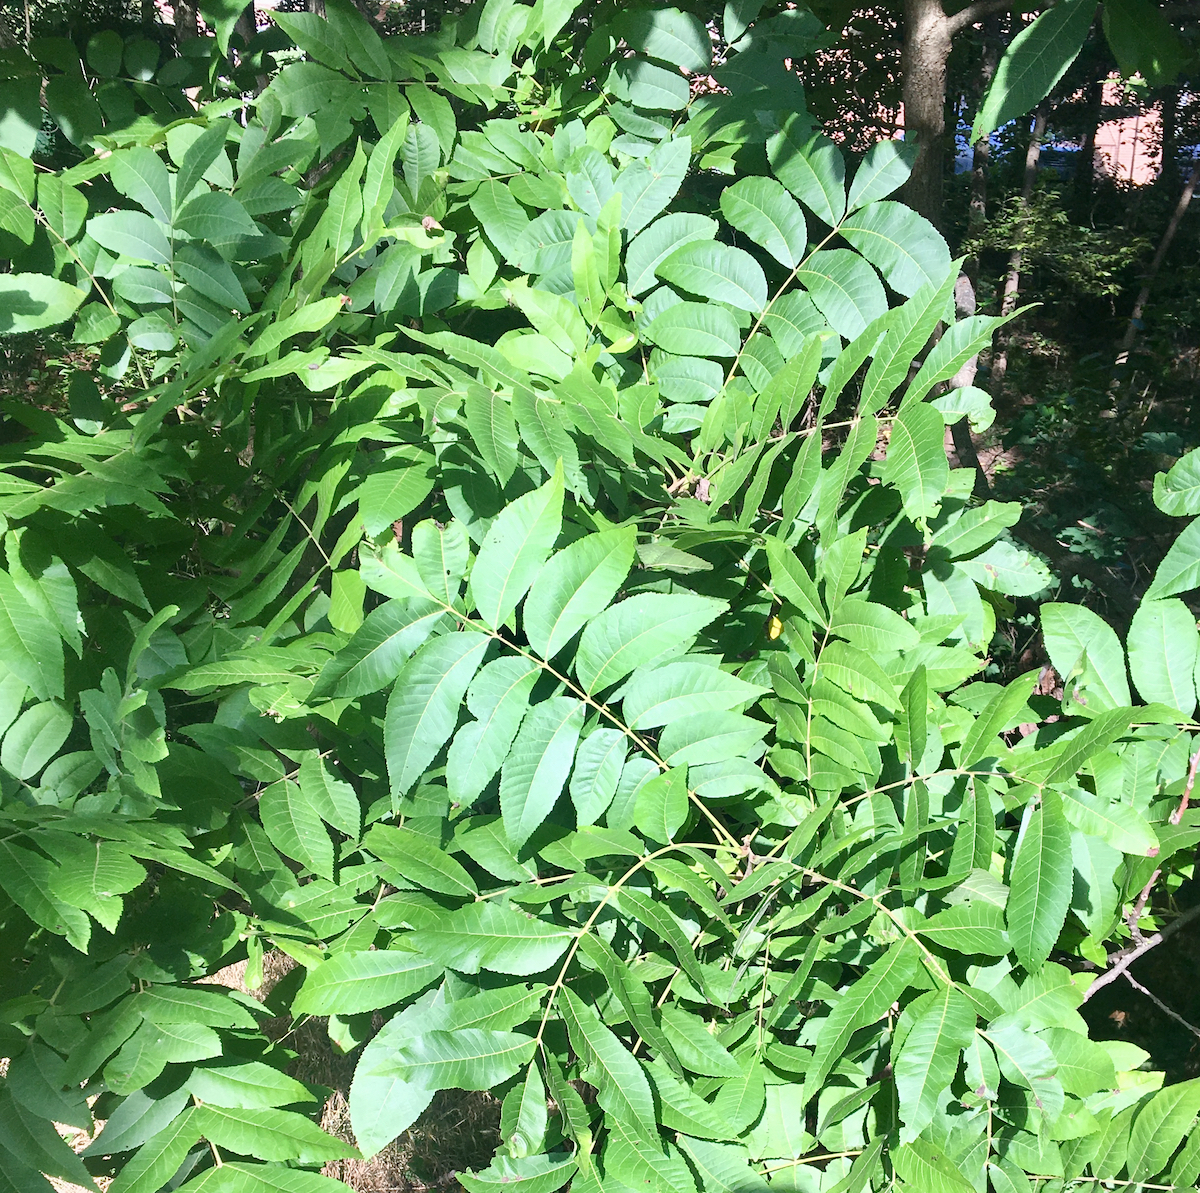 The Scientific Name is Juglans nigra. You will likely hear them called Black Walnut. This picture shows the Large, compound, alternate, pinnate leaves with 9-21 leaflets; often lacking a terminal leaflet. Leaf margins are finely toothed. of Juglans nigra